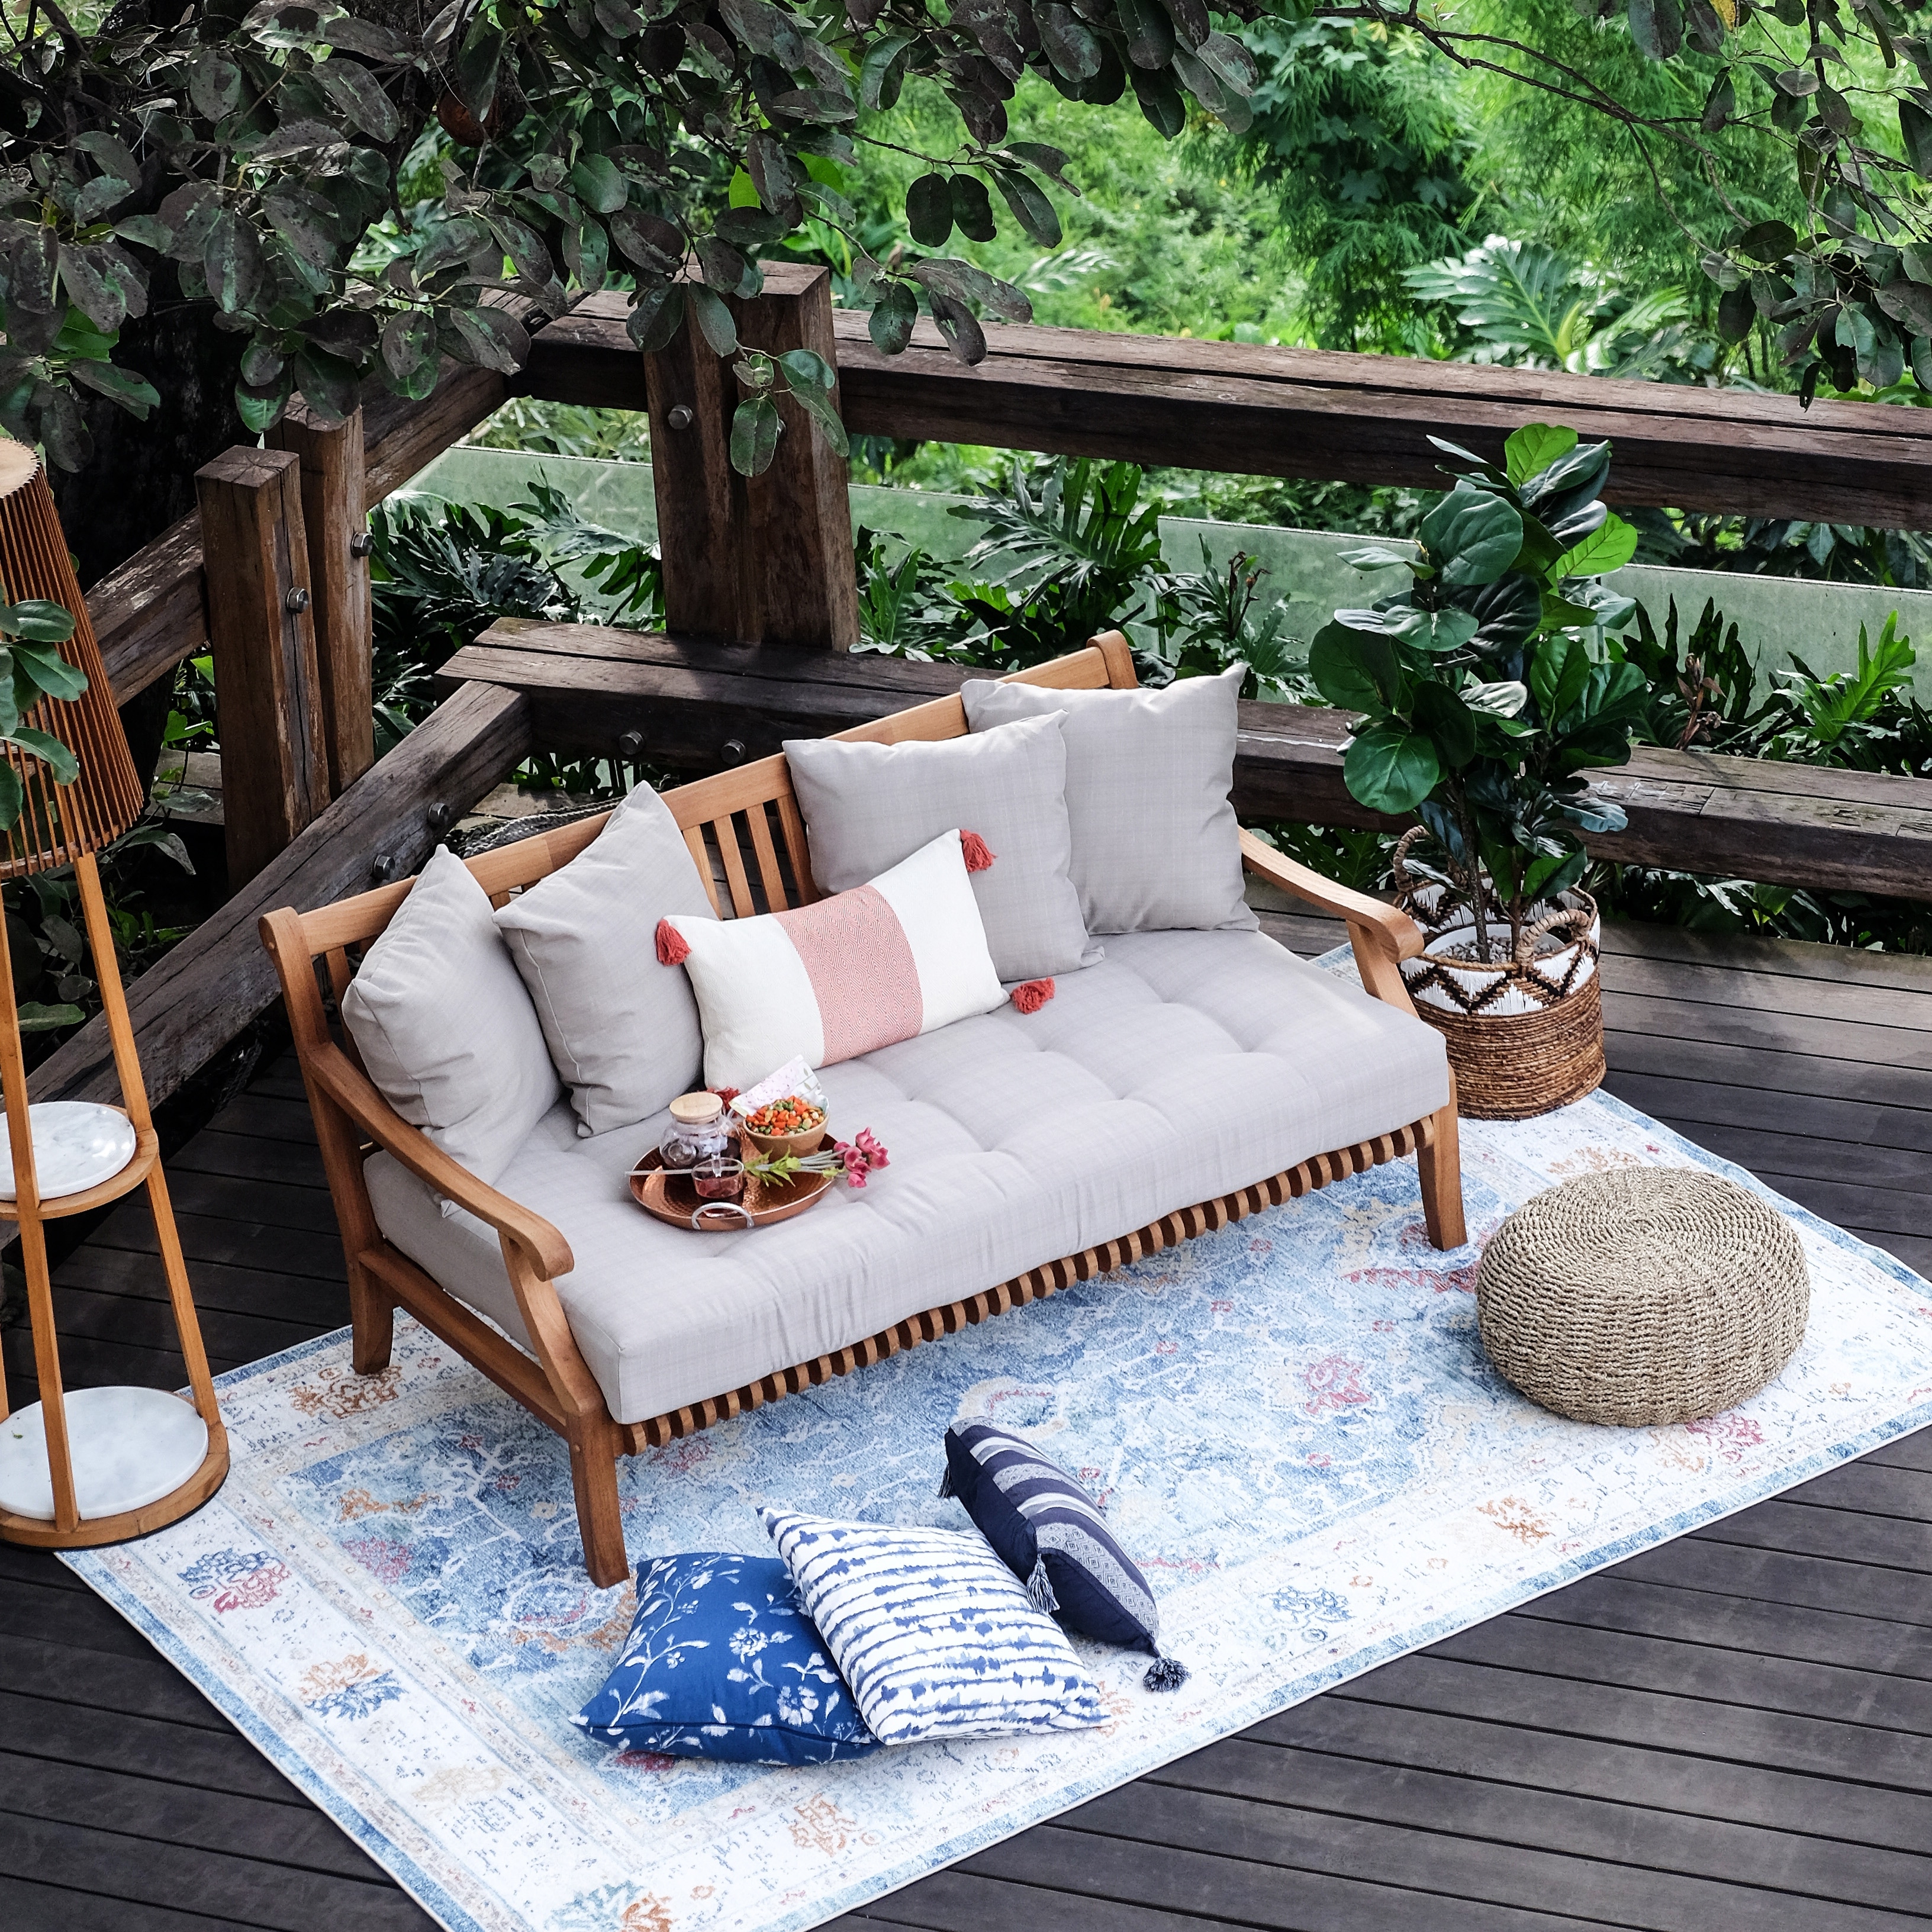 https://ak1.ostkcdn.com/images/products/is/images/direct/dff546aba94816518fd39030f2153739fd48912d/Chara-Teak-Patio-Daybed-with-Cushion.jpg